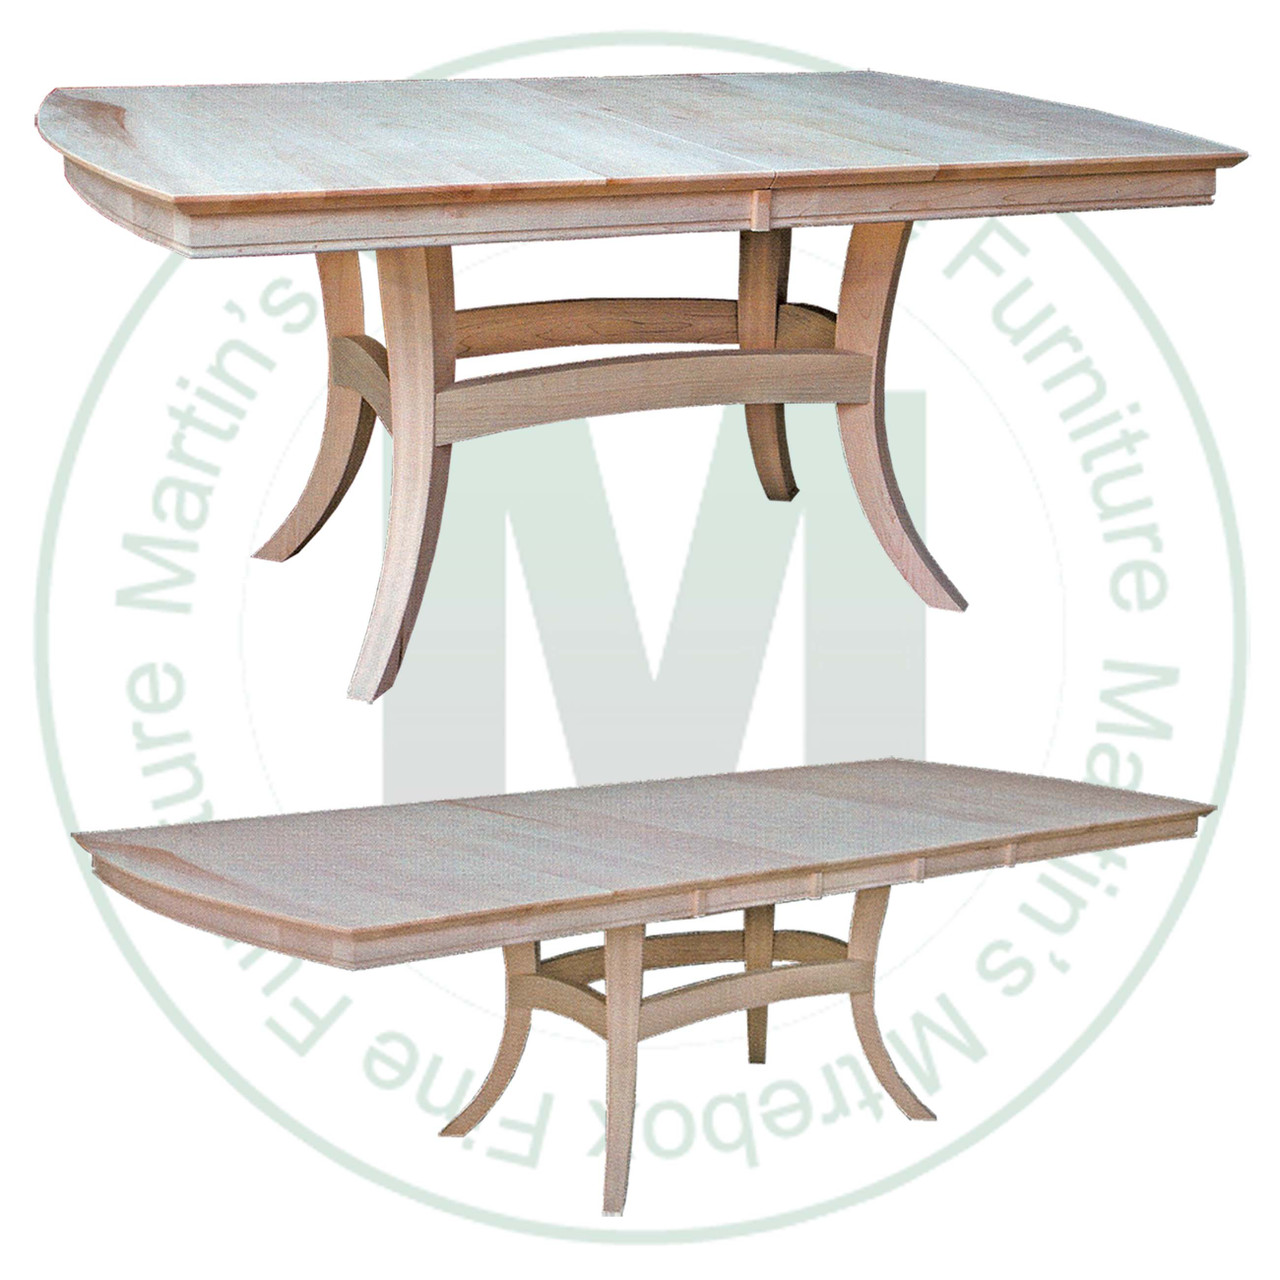 Maple Tokyo Double Pedestal Table 42''D x 66''W x 30''H With 2 - 12'' Leaves